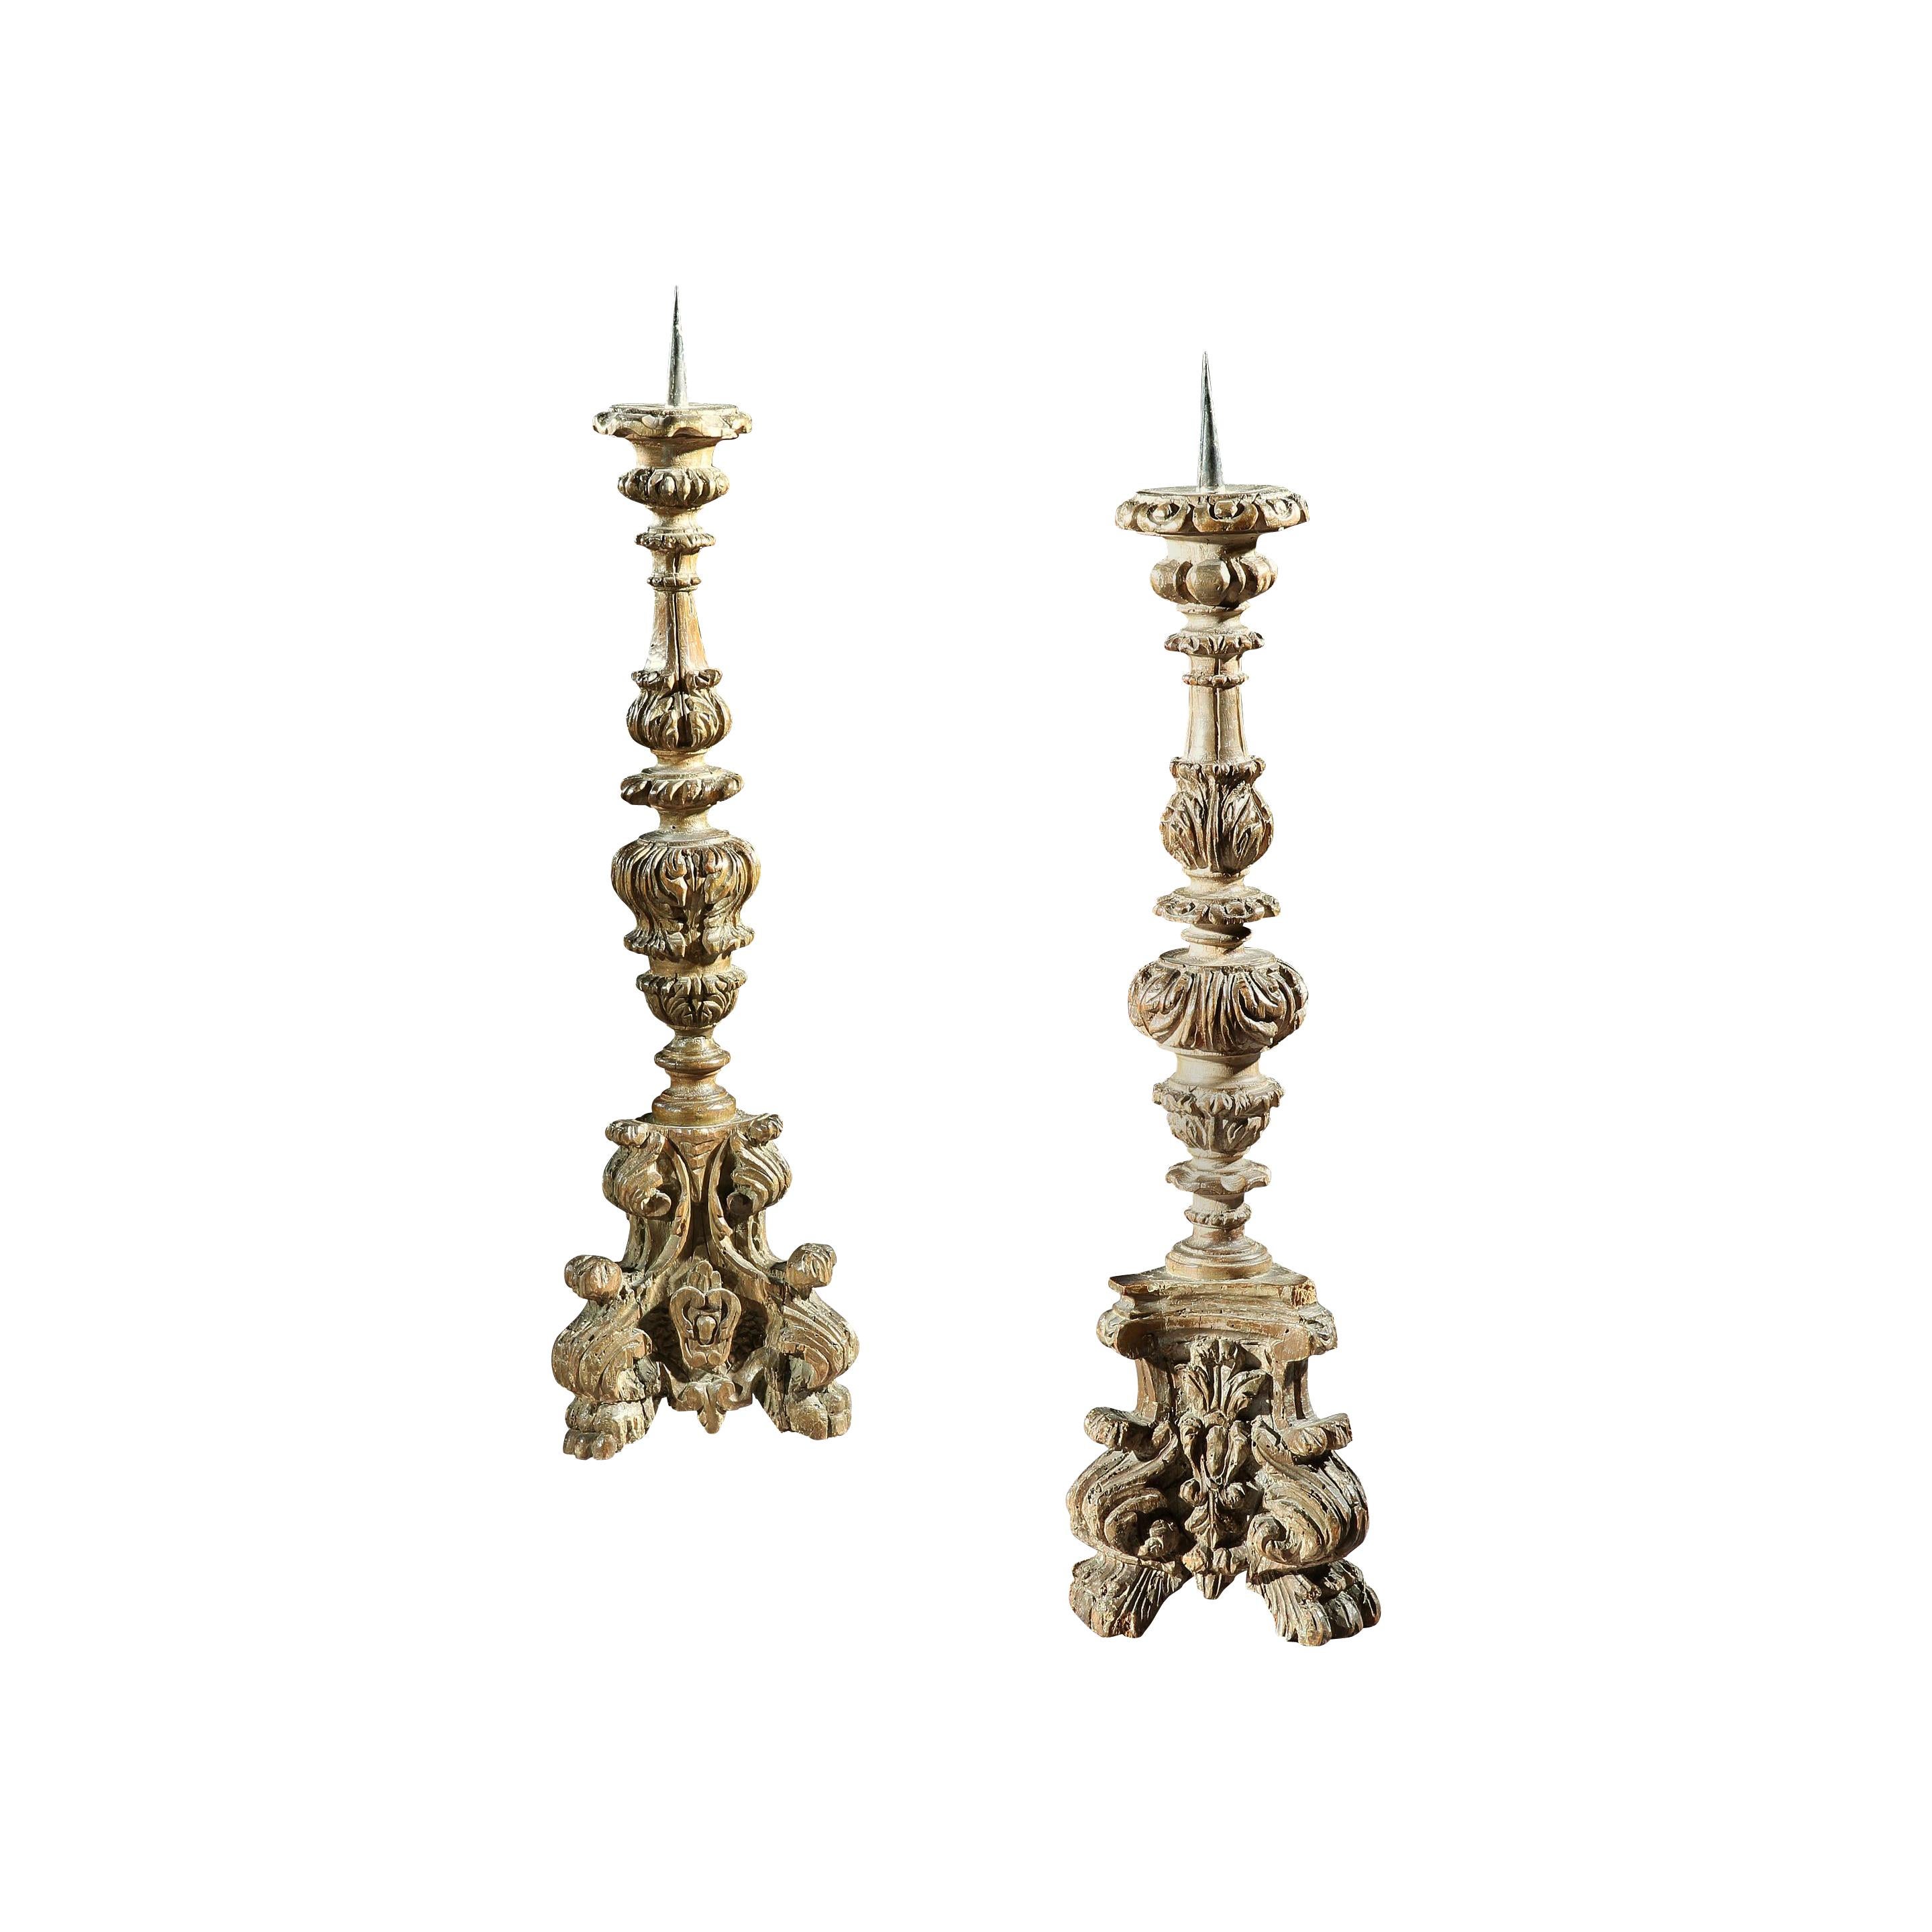 Candlestick, Pair, Italian, 19th Century, Baroque-Style, Beech, Carved